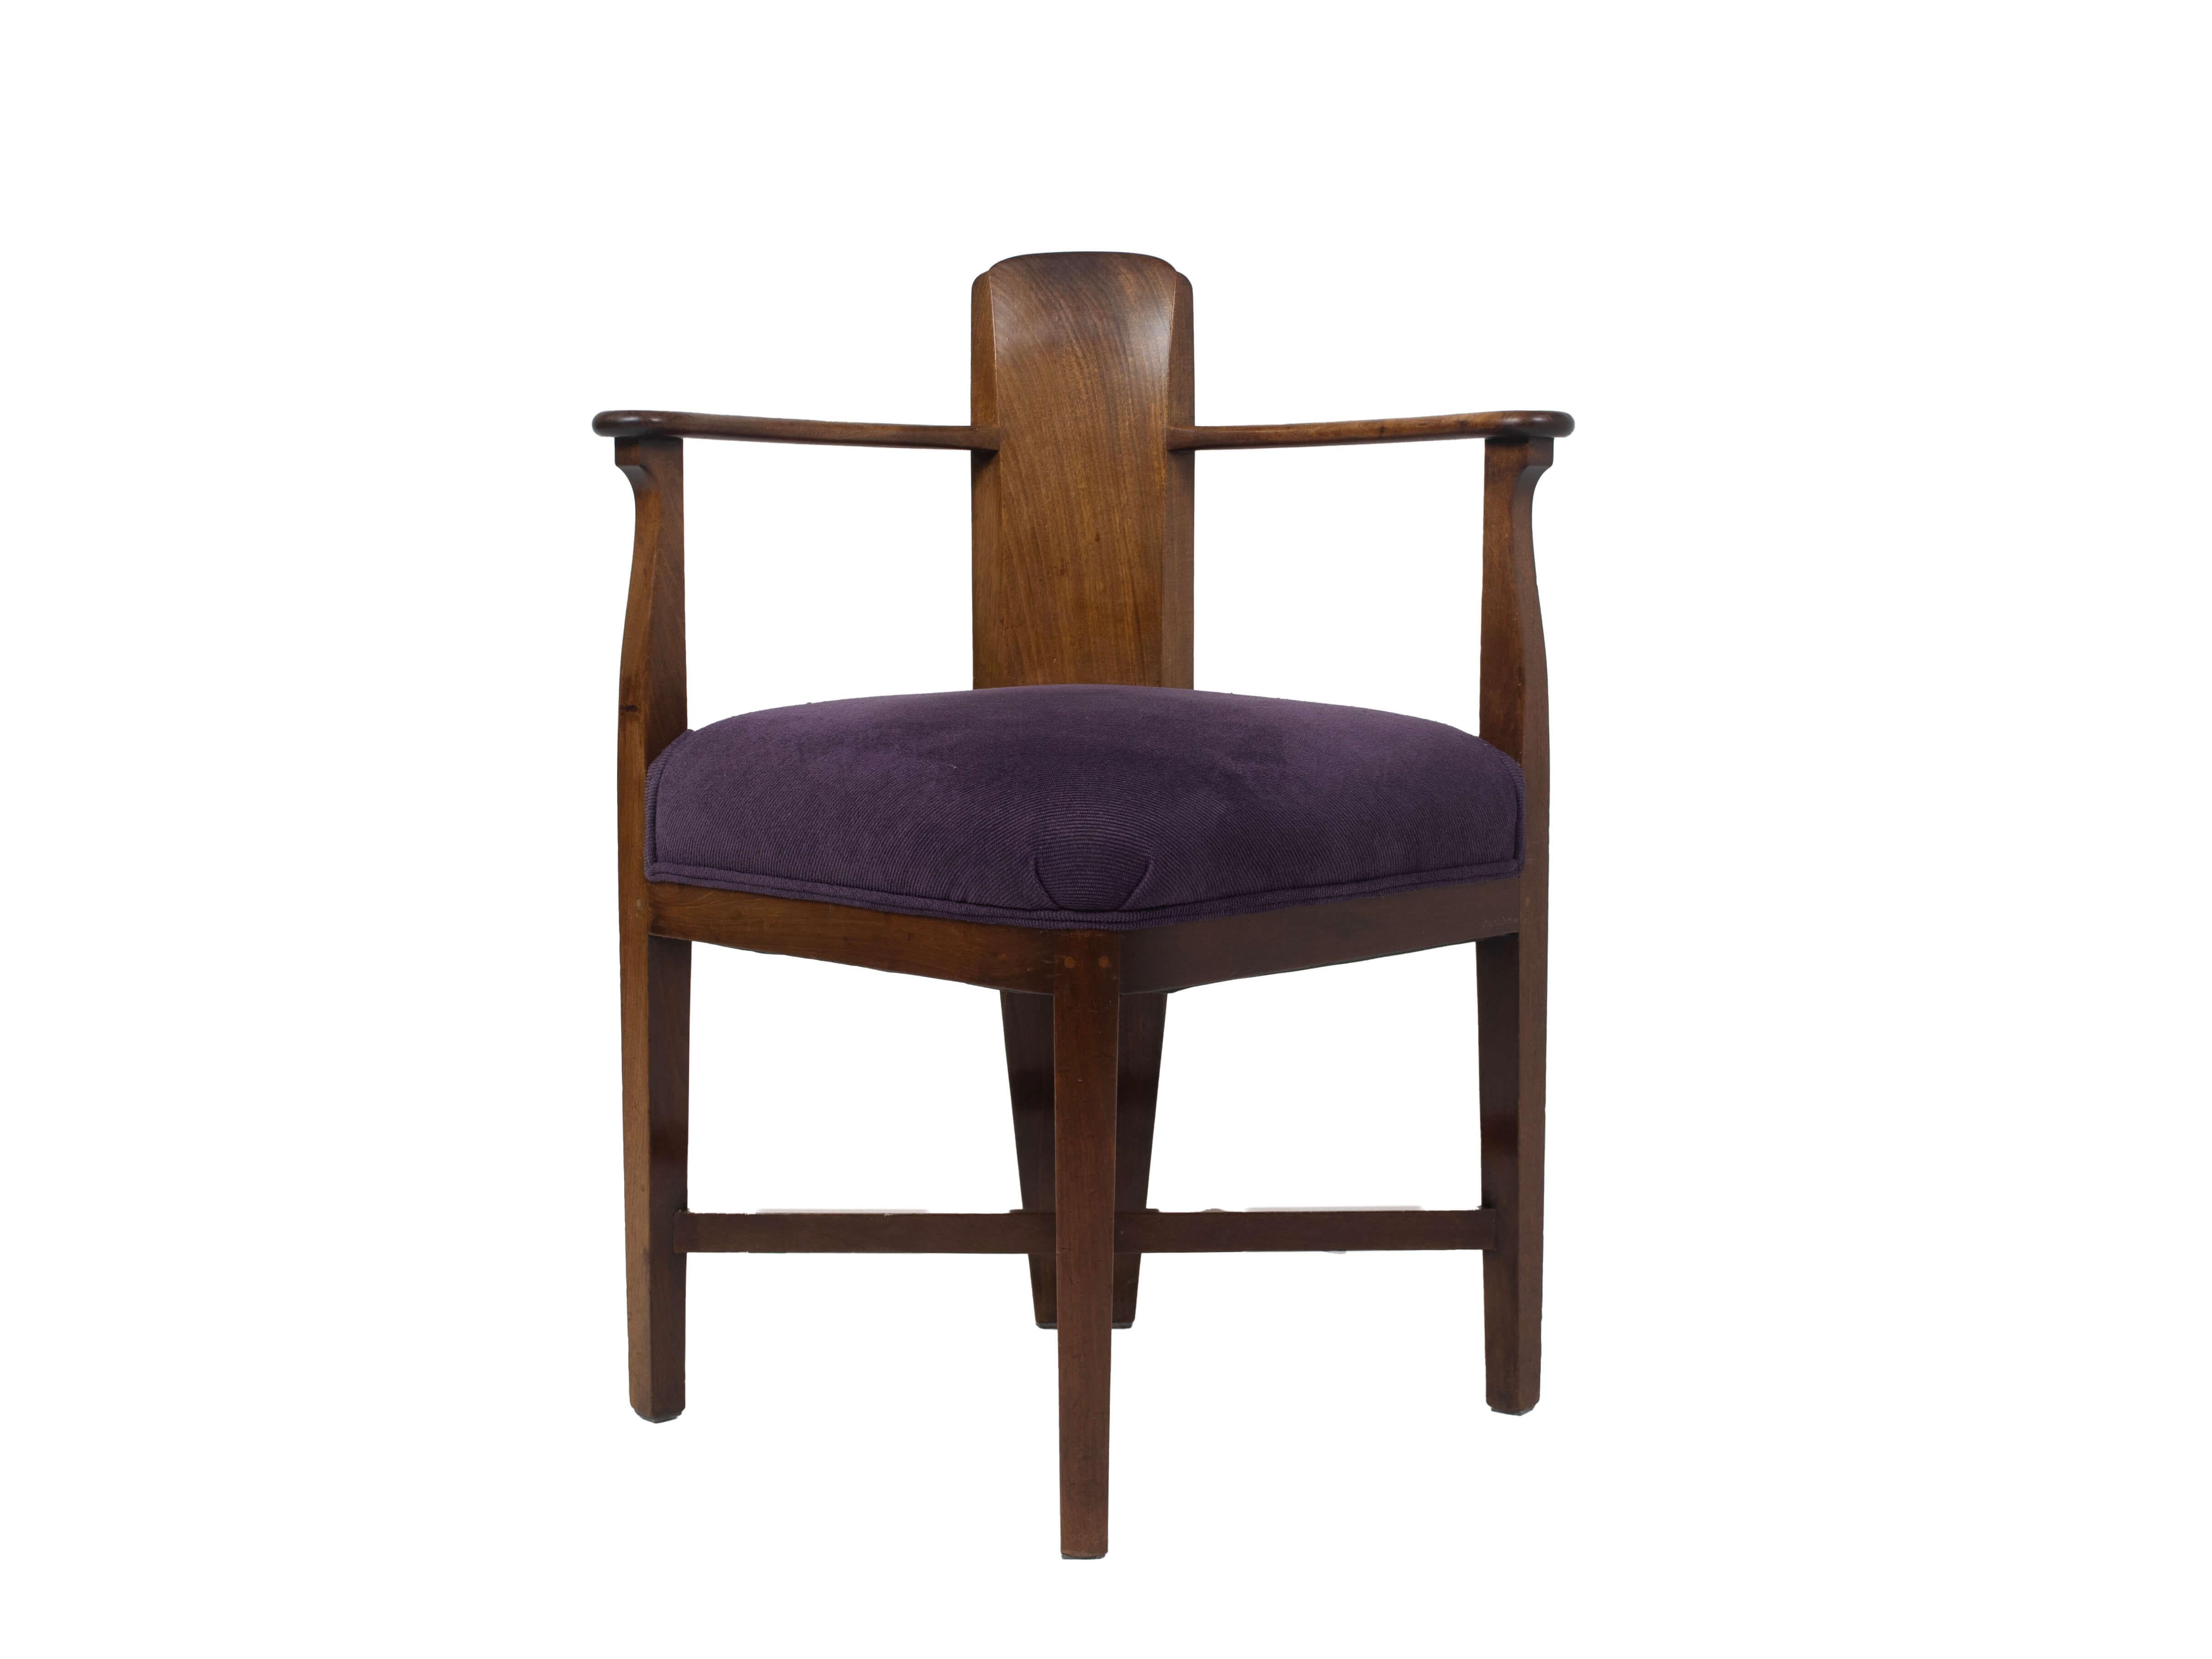 Mahogany corner chair (model Opus 587) designed by Jac van den Bosch for 't Binnenhuis in Amsterdam, Netherlands 1910s. This amazing chair is simple and stately yet elegant and a bright addition to any interior with its purple fabric. Pure